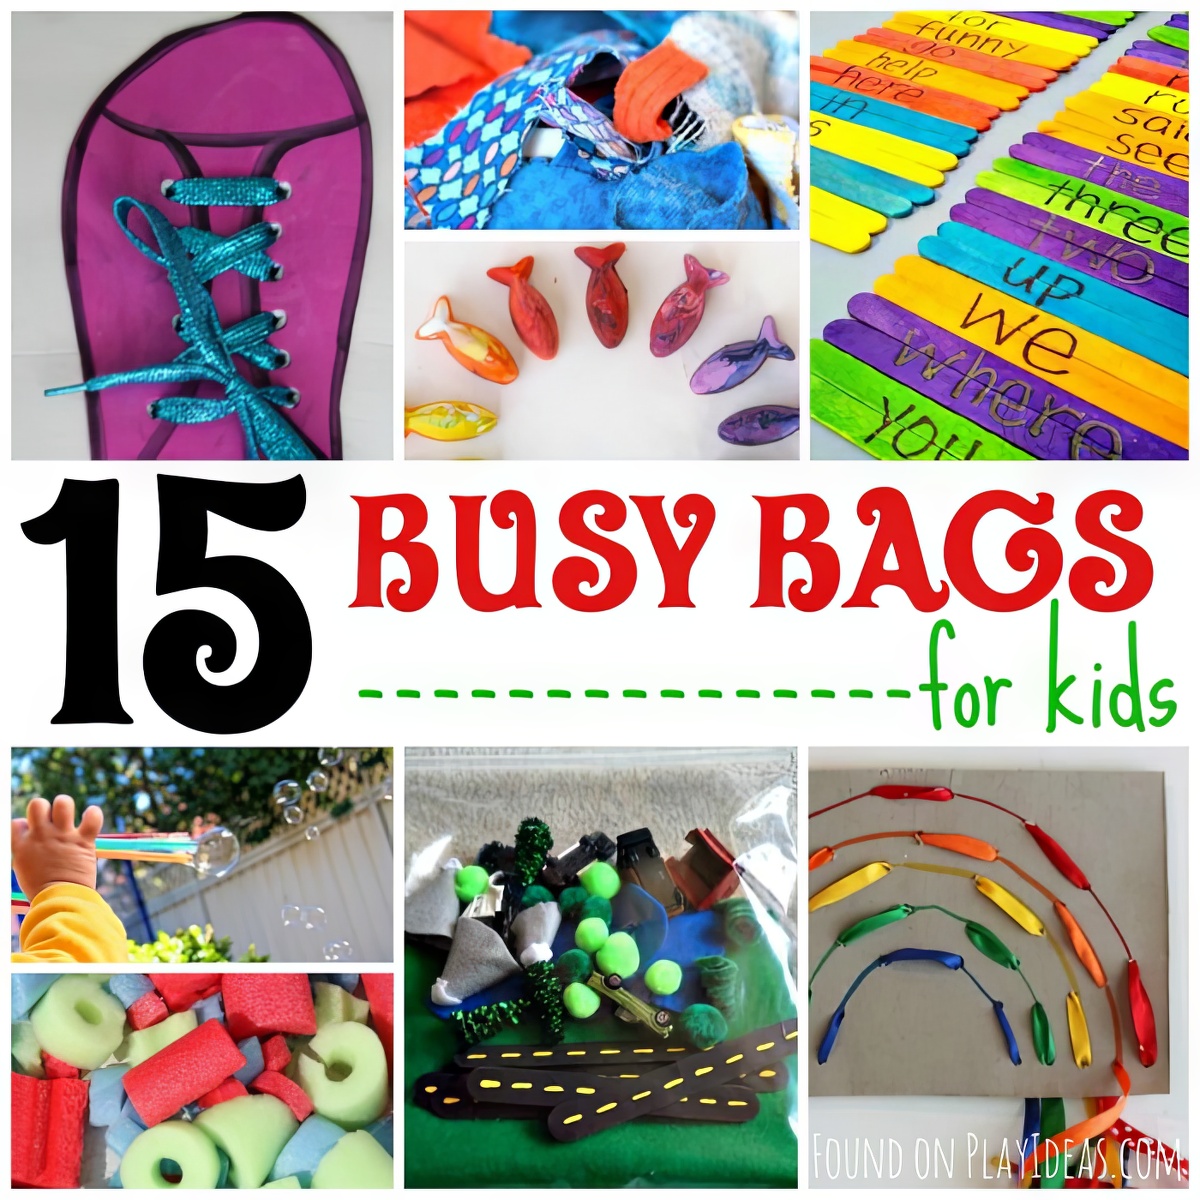 collage of 15 busy bag ideas for kids using simple materials found at home